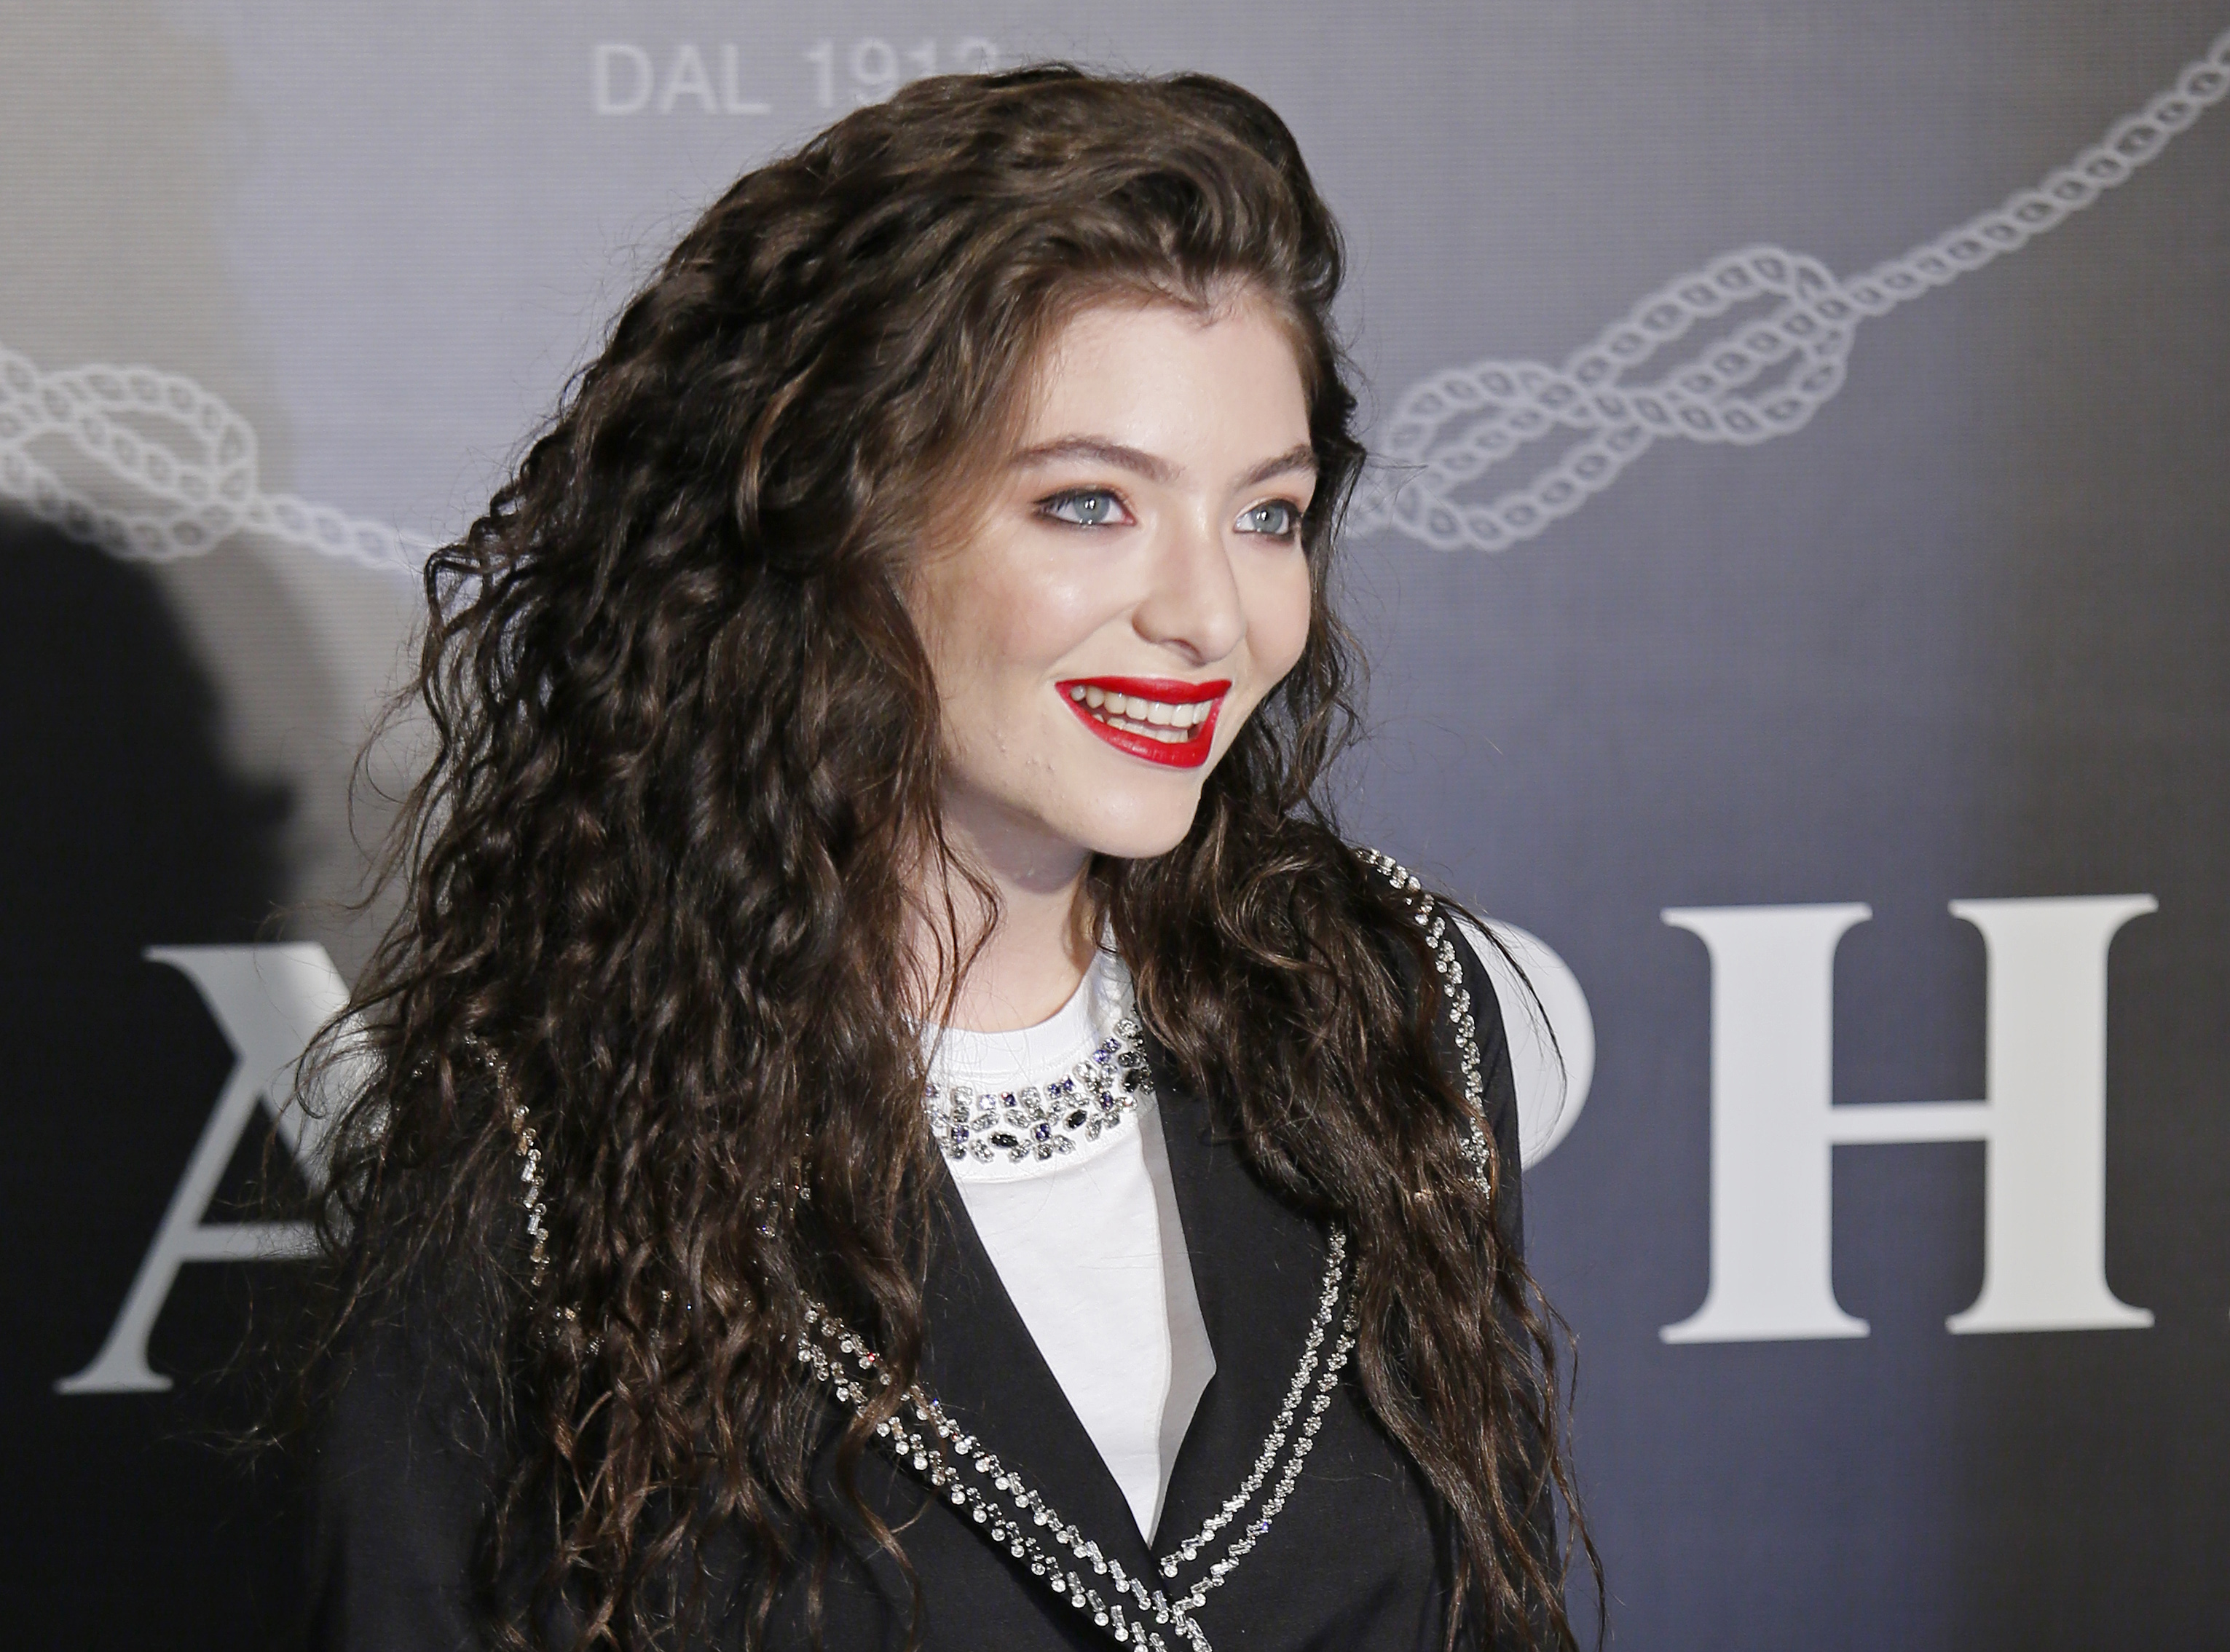 Singer Lorde poses for photographers during an promotional event in Hong Kong Tuesday, Nov. 18, 2014. (Vincent Yu—AP)